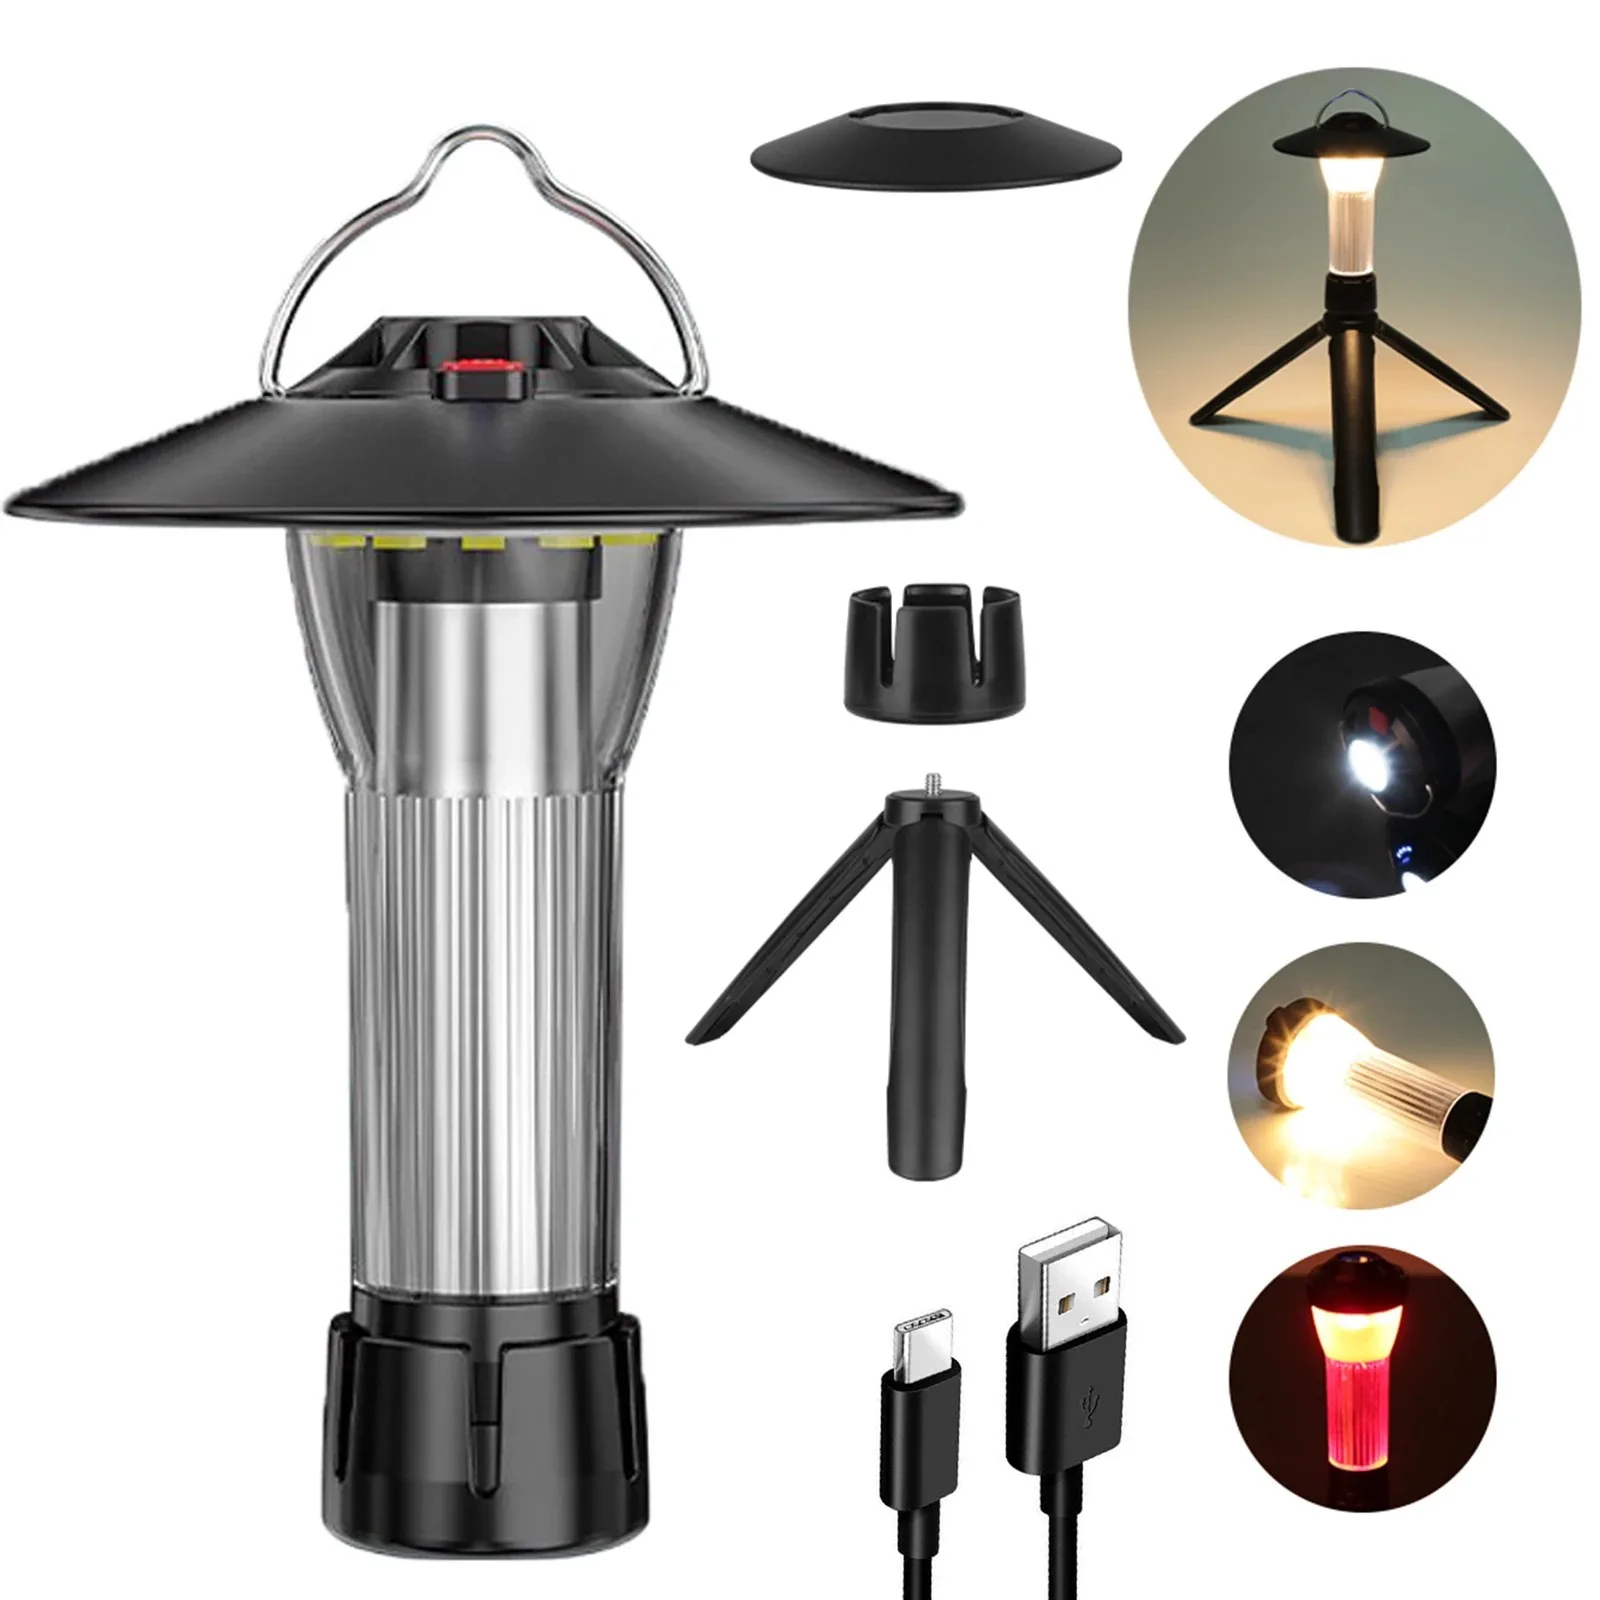 

3000mAh Portable Magnetic Camping Lantern Light USB Rechargeable 5 Lighting Modes Outdoor Led Flashlight Tent Camp Supplies